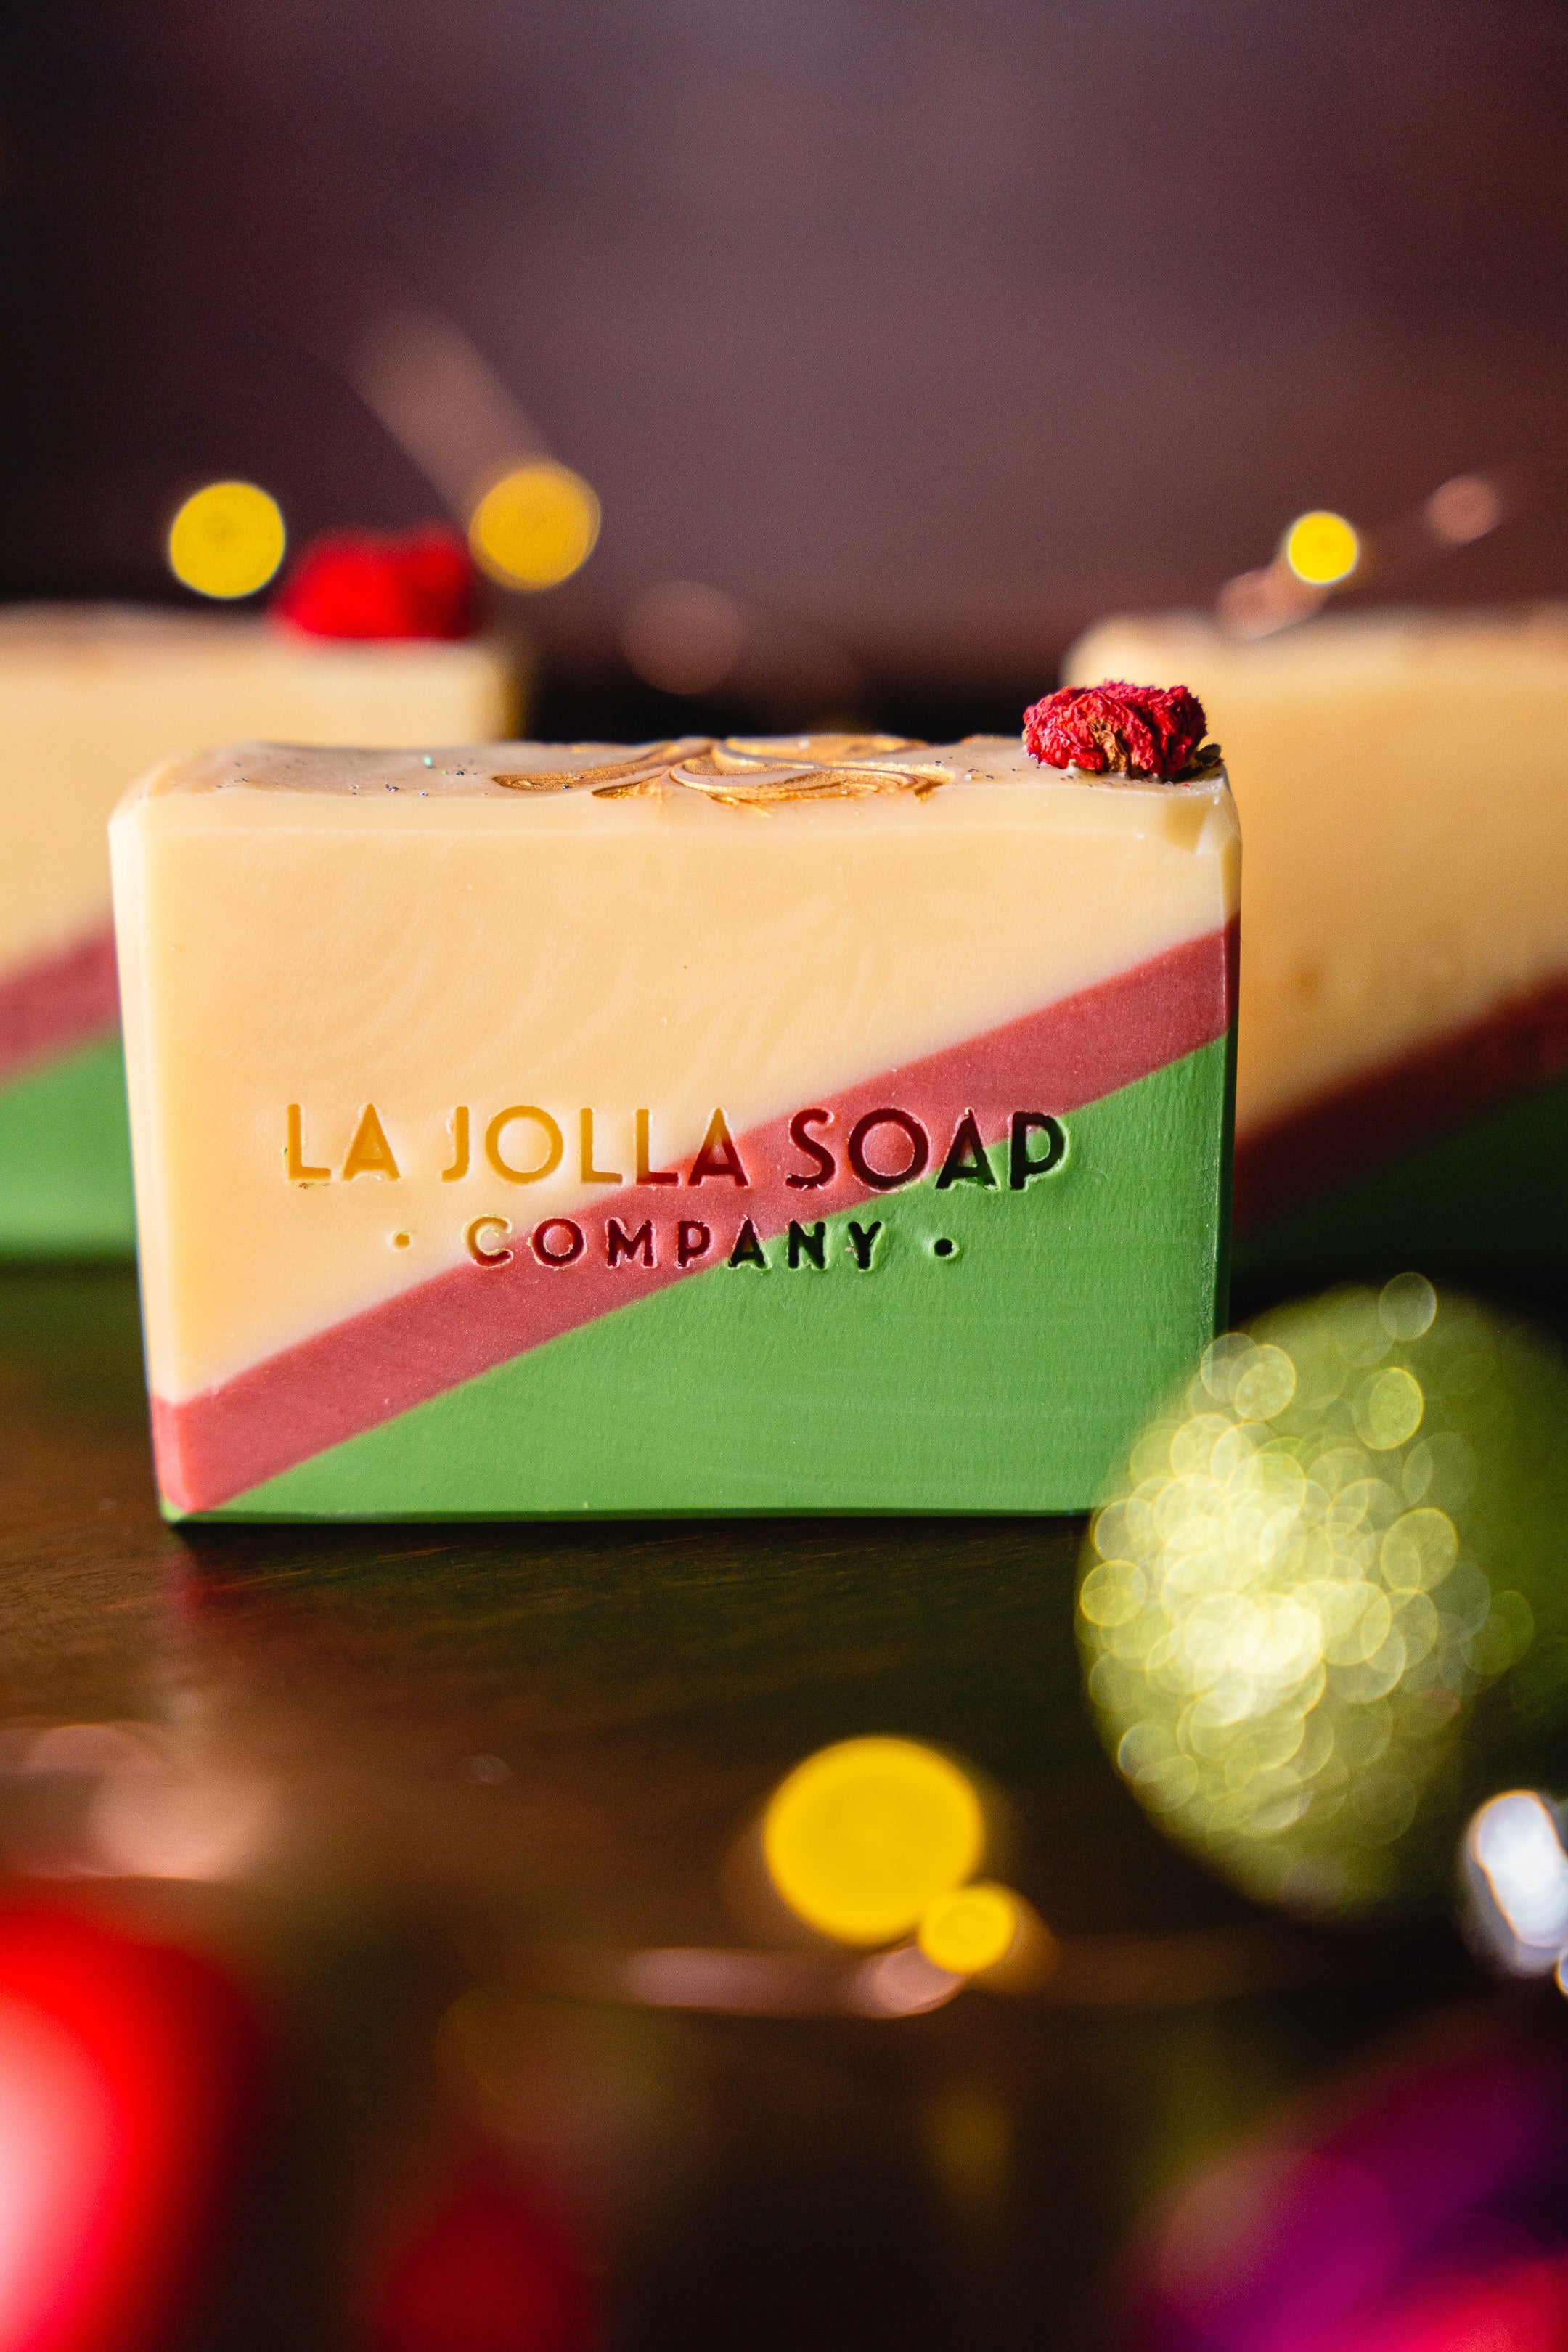 A beautiful bar with a creamy lather, rich in antioxidants and hydrating lipids. The scent is uplifting and festive with a pure essential oil blend of cinnamon bark, cedarwood and peppermint. Perfect sink-side or bath soap bar, keeping you and your guests clean and your powder room smelling fresh into the new year!